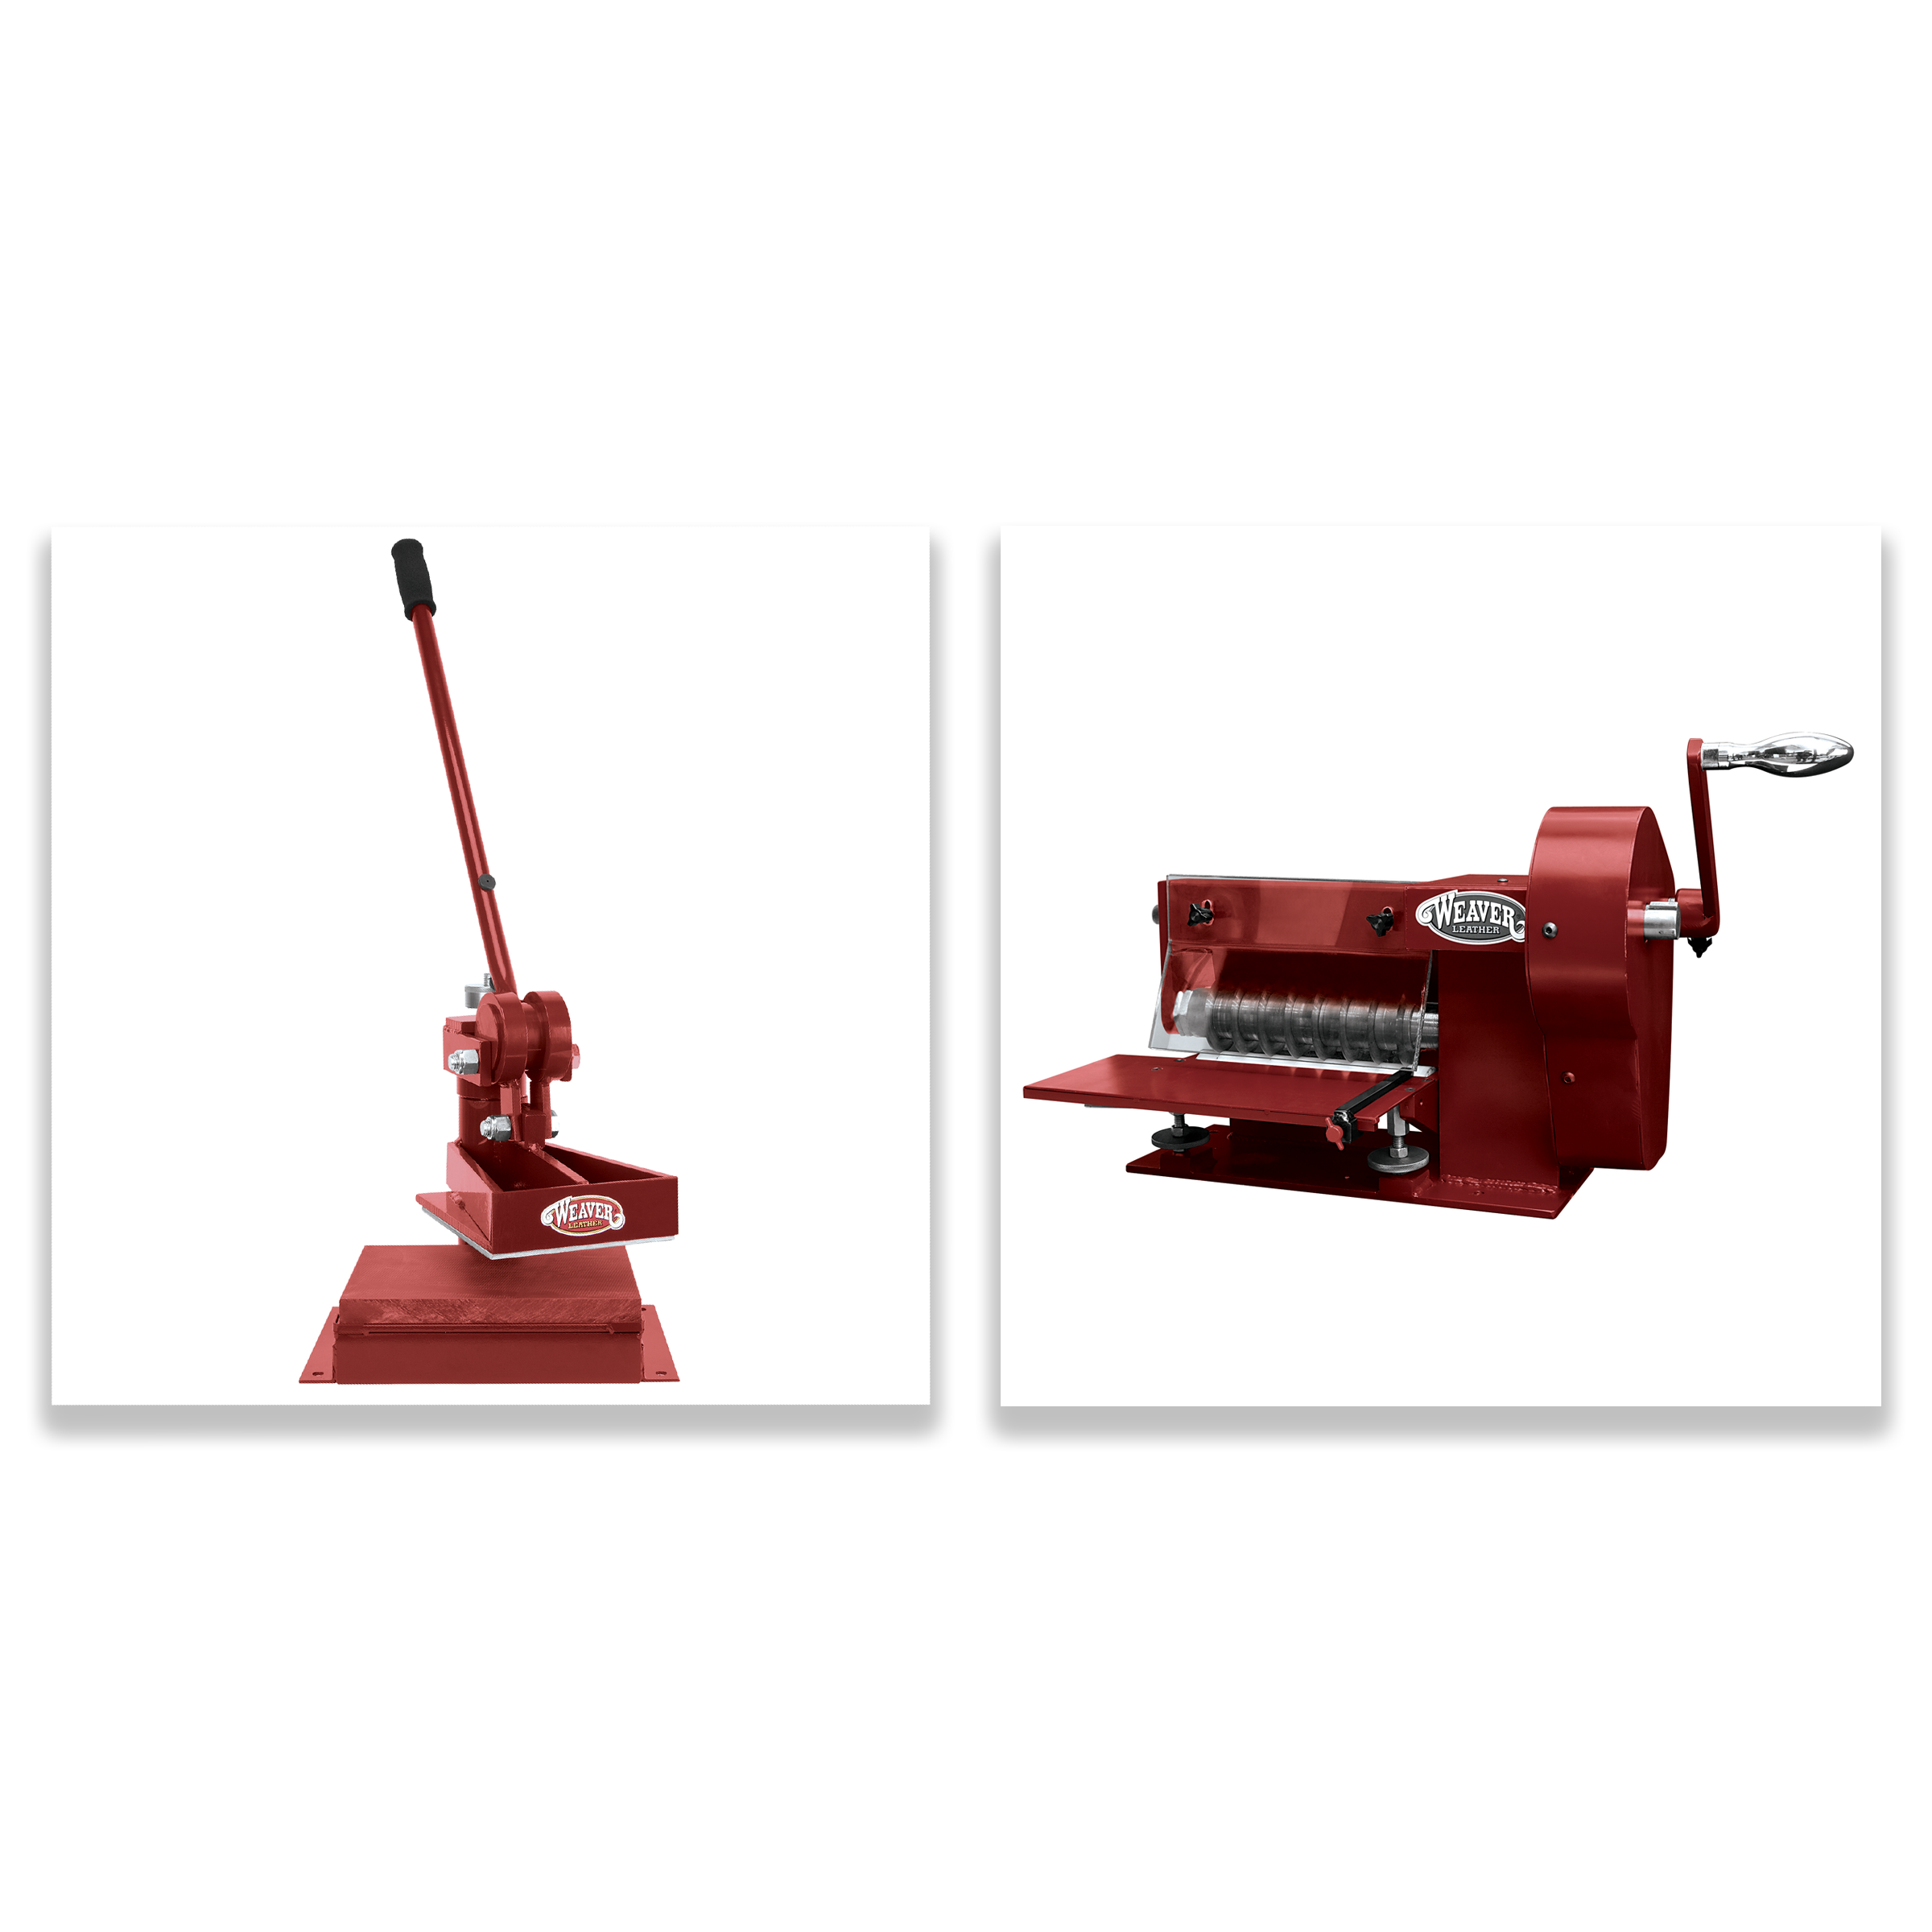 Mighty Wonder 4 Ton Clicker Press - Weaver Leather Supply